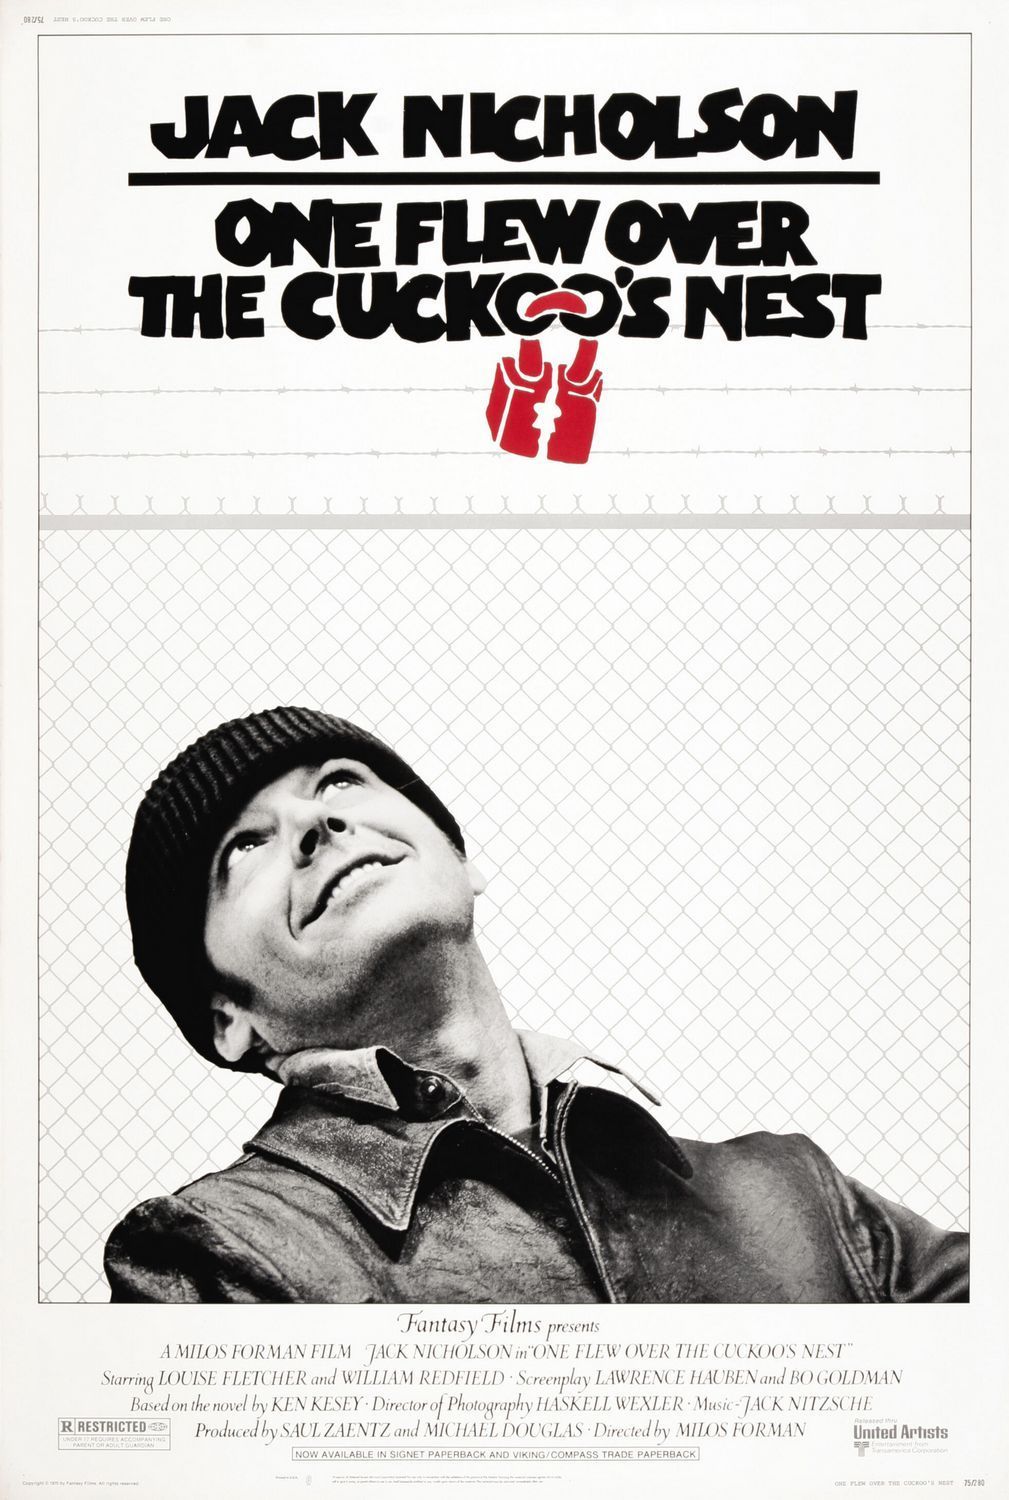 BACK IN THE DAY |11/19/75| The movie, One Flew Over the Cuckoo’s Nest, is released